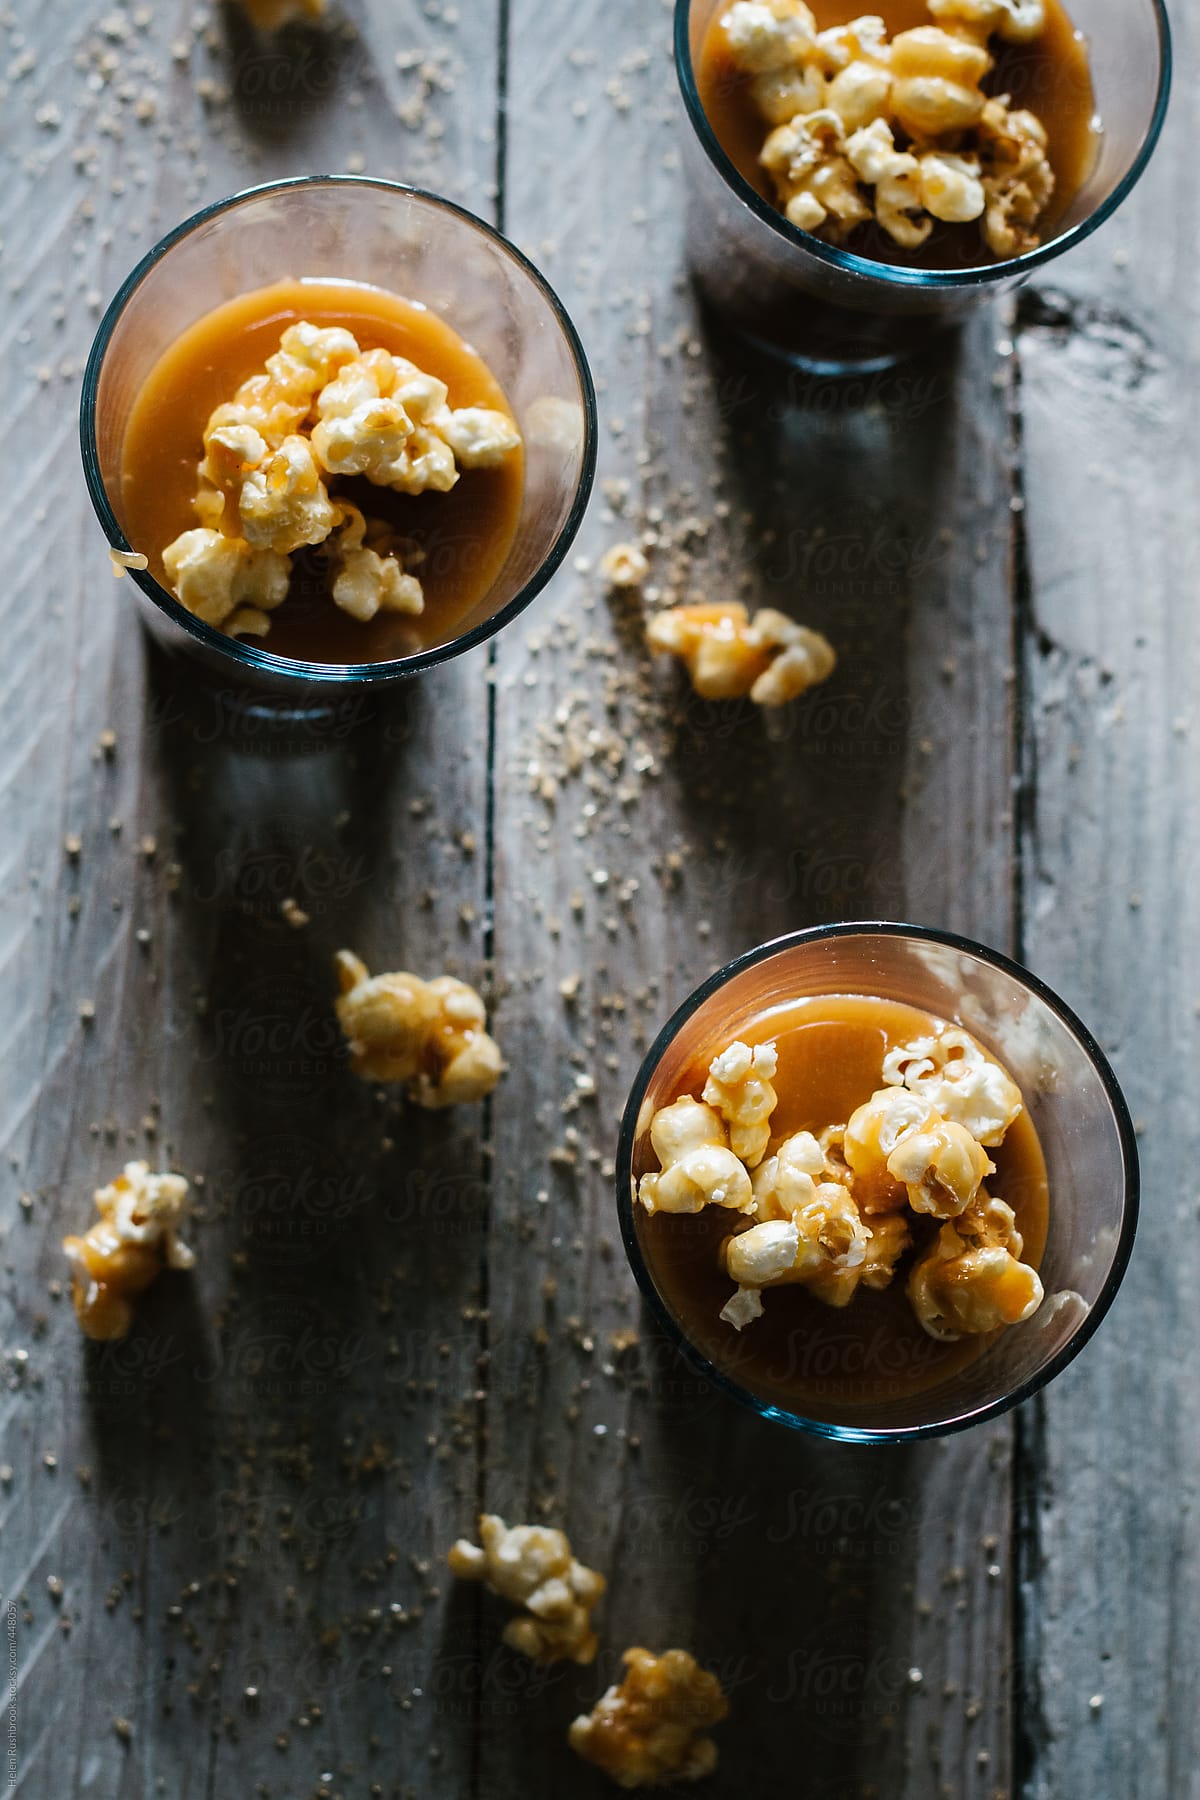 Chocolate mousse with salted caramel sauce and toffee popcorn.